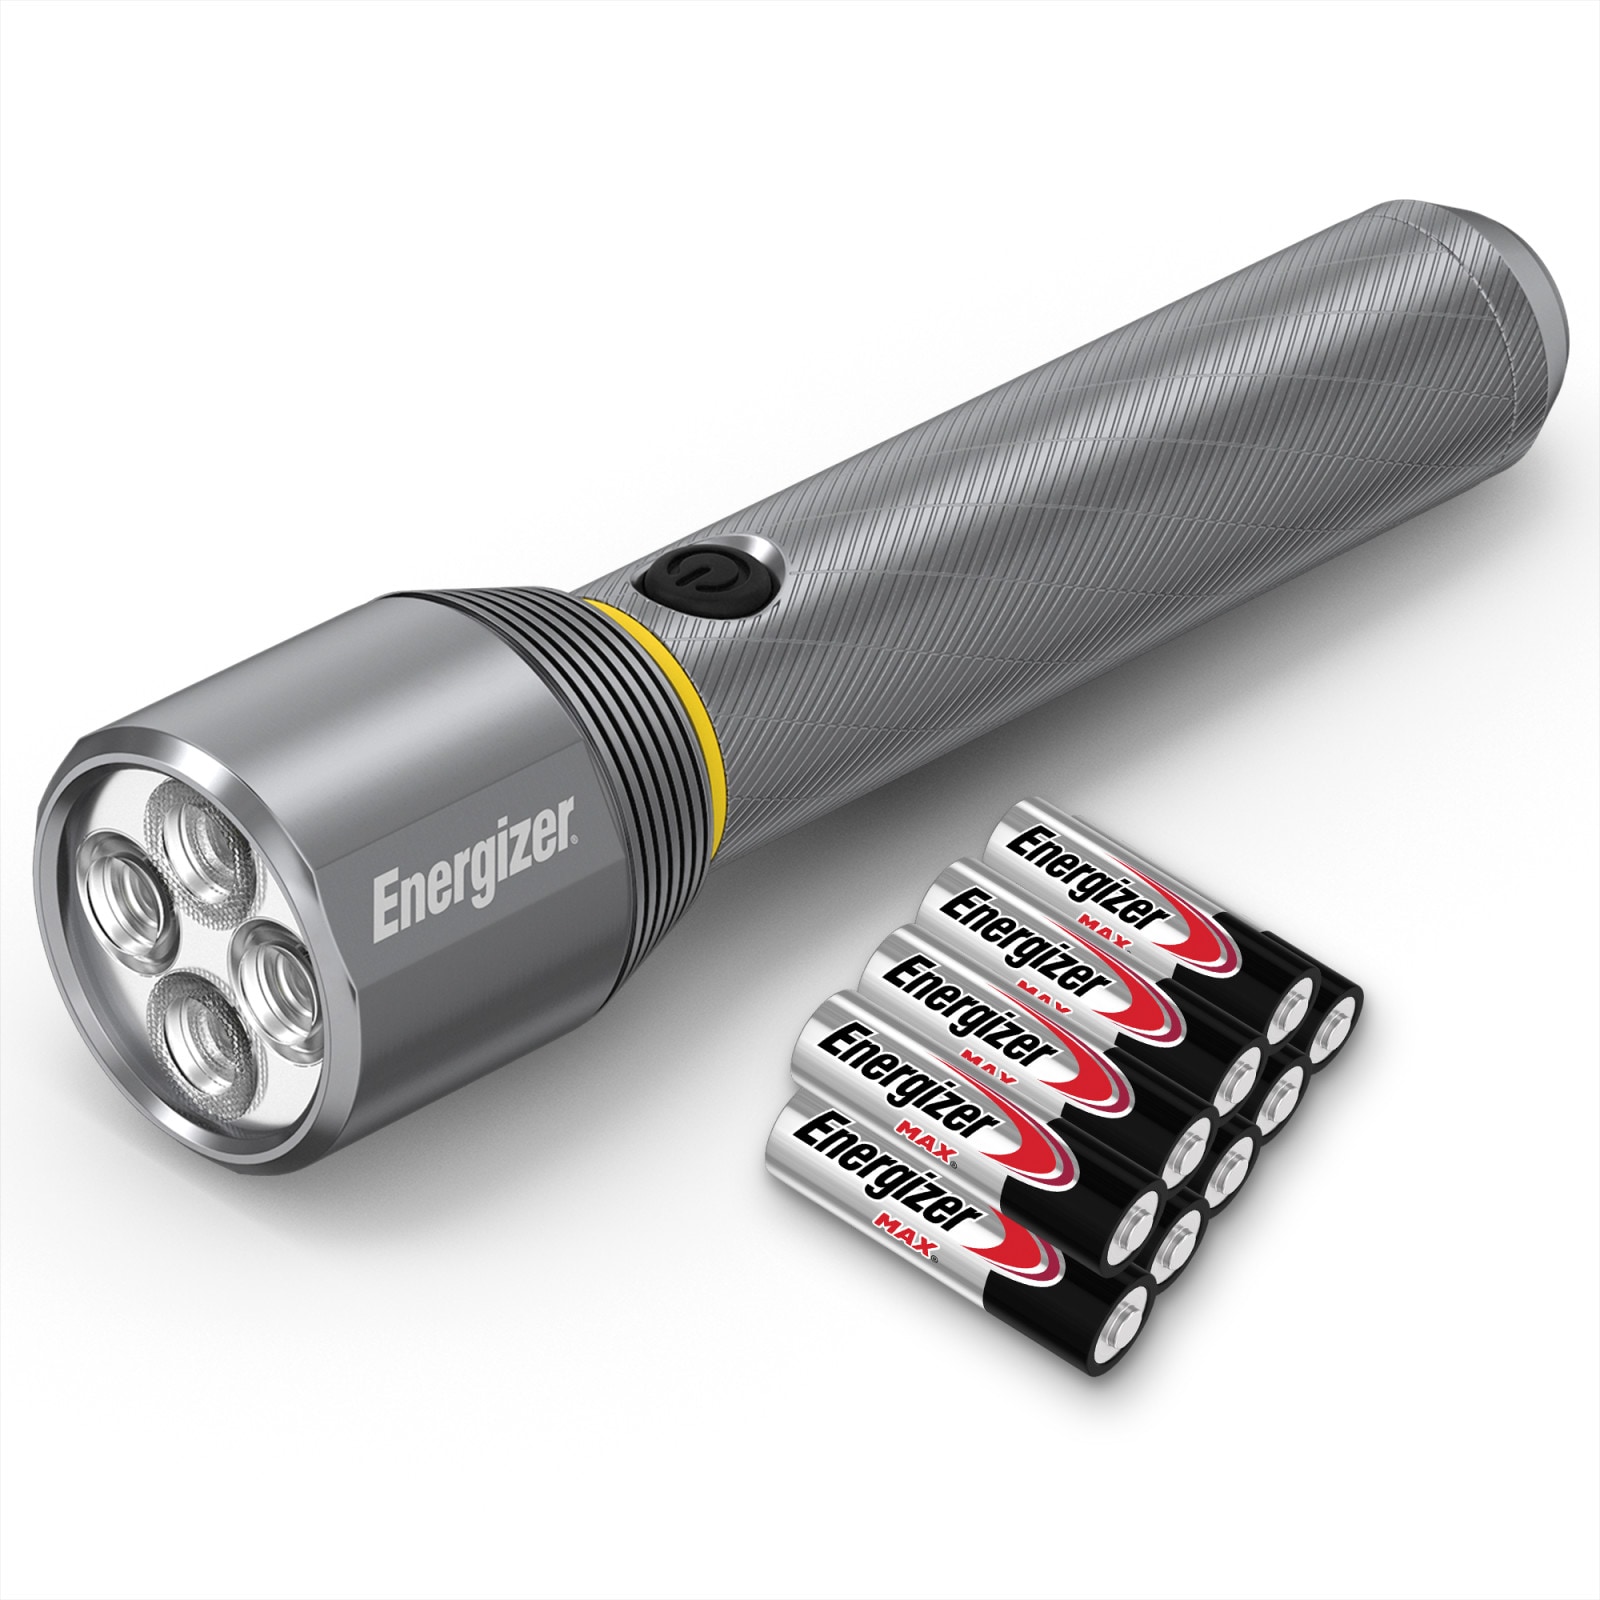 12 X 9 LED ULTRA BRIGHT METAL METALLIC TORCHES 4 COLOURS INCLUDES BATTERIES 